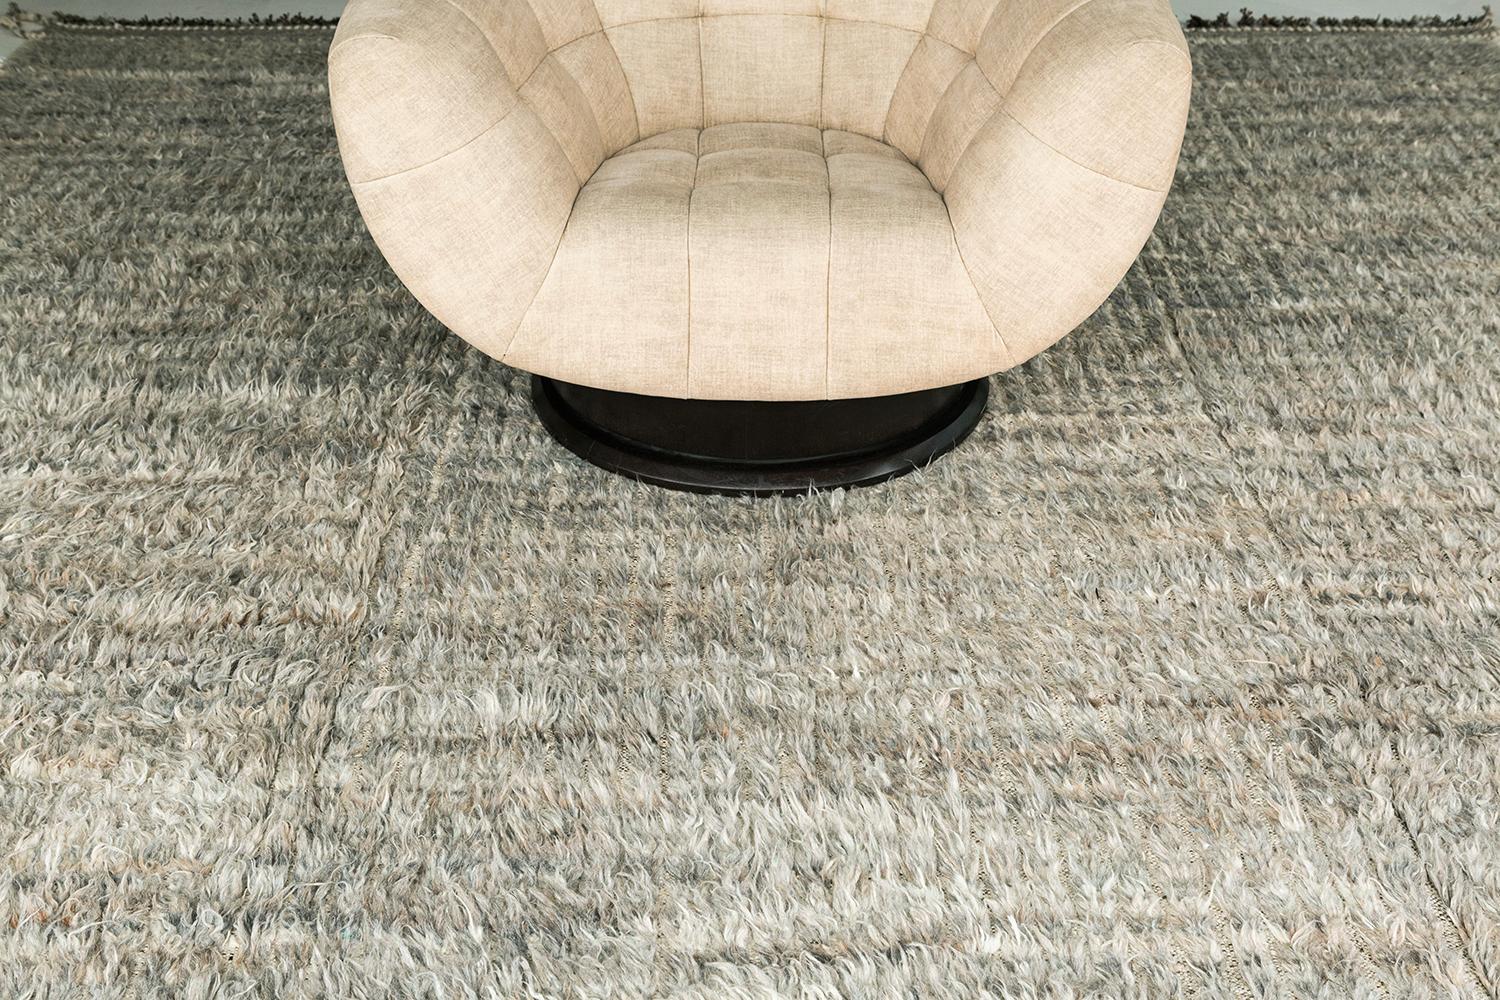 Fohn' is a handwoven luxurious wool rug with timeless embossed line detailing. In addition to its neutral earth-toned taupe flat-weave, Shipca has a beautiful gray shag that brings a lustrous and contemporary feel to one's space. The Haute Bohemian